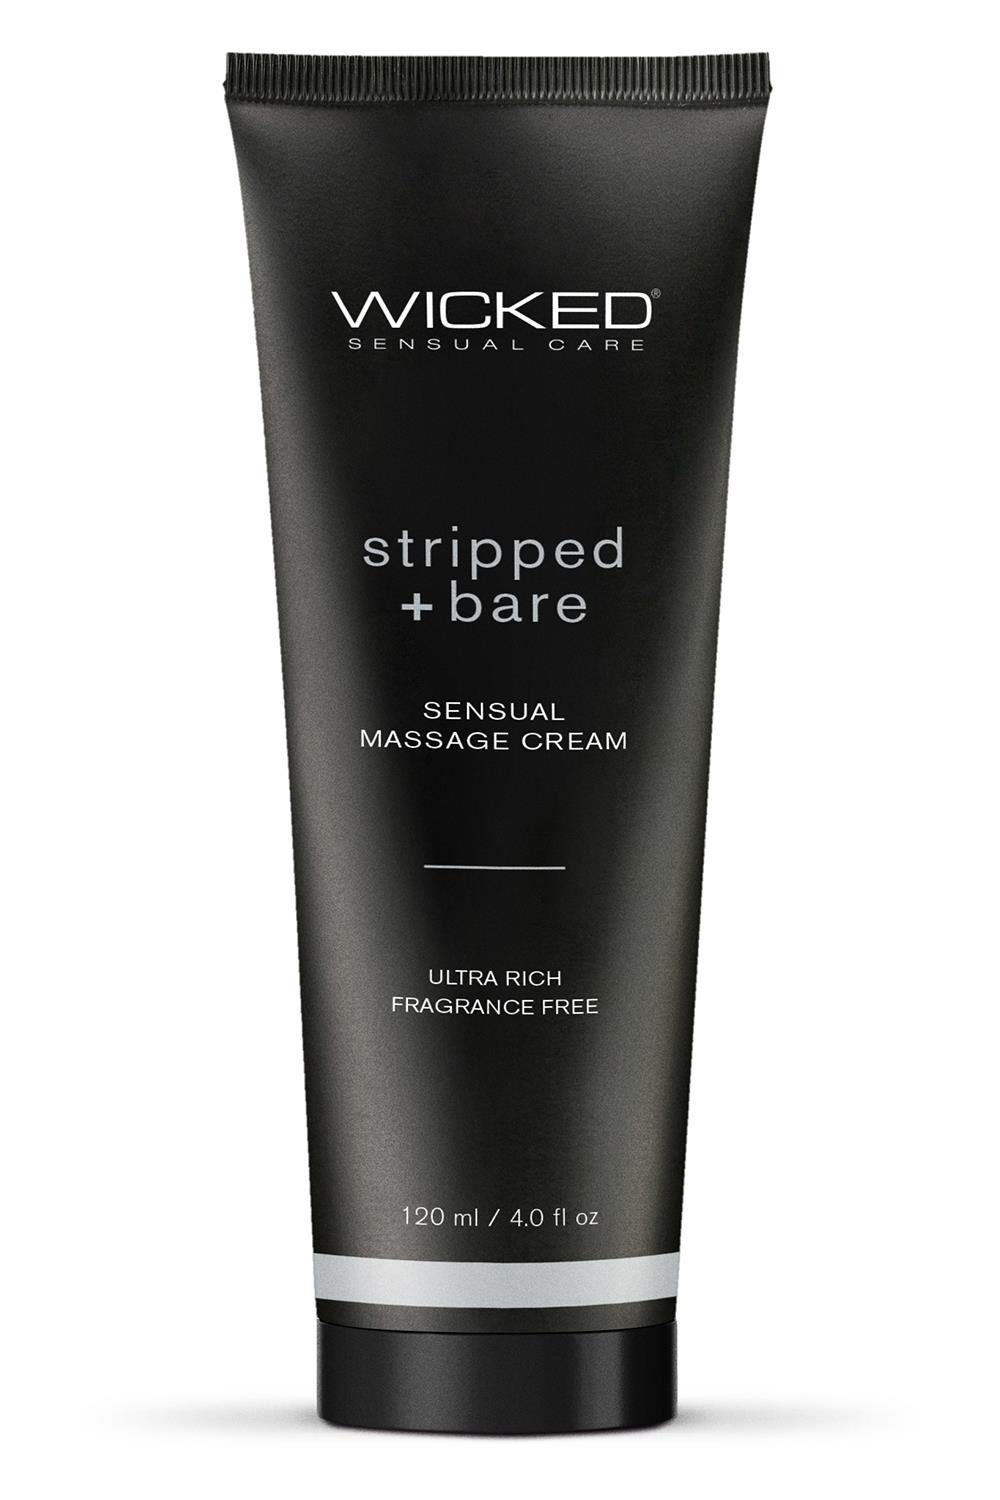 Wicked Gleitgel Wicked Sensual Massage Cream 120ml Stripped And Bare Unscented